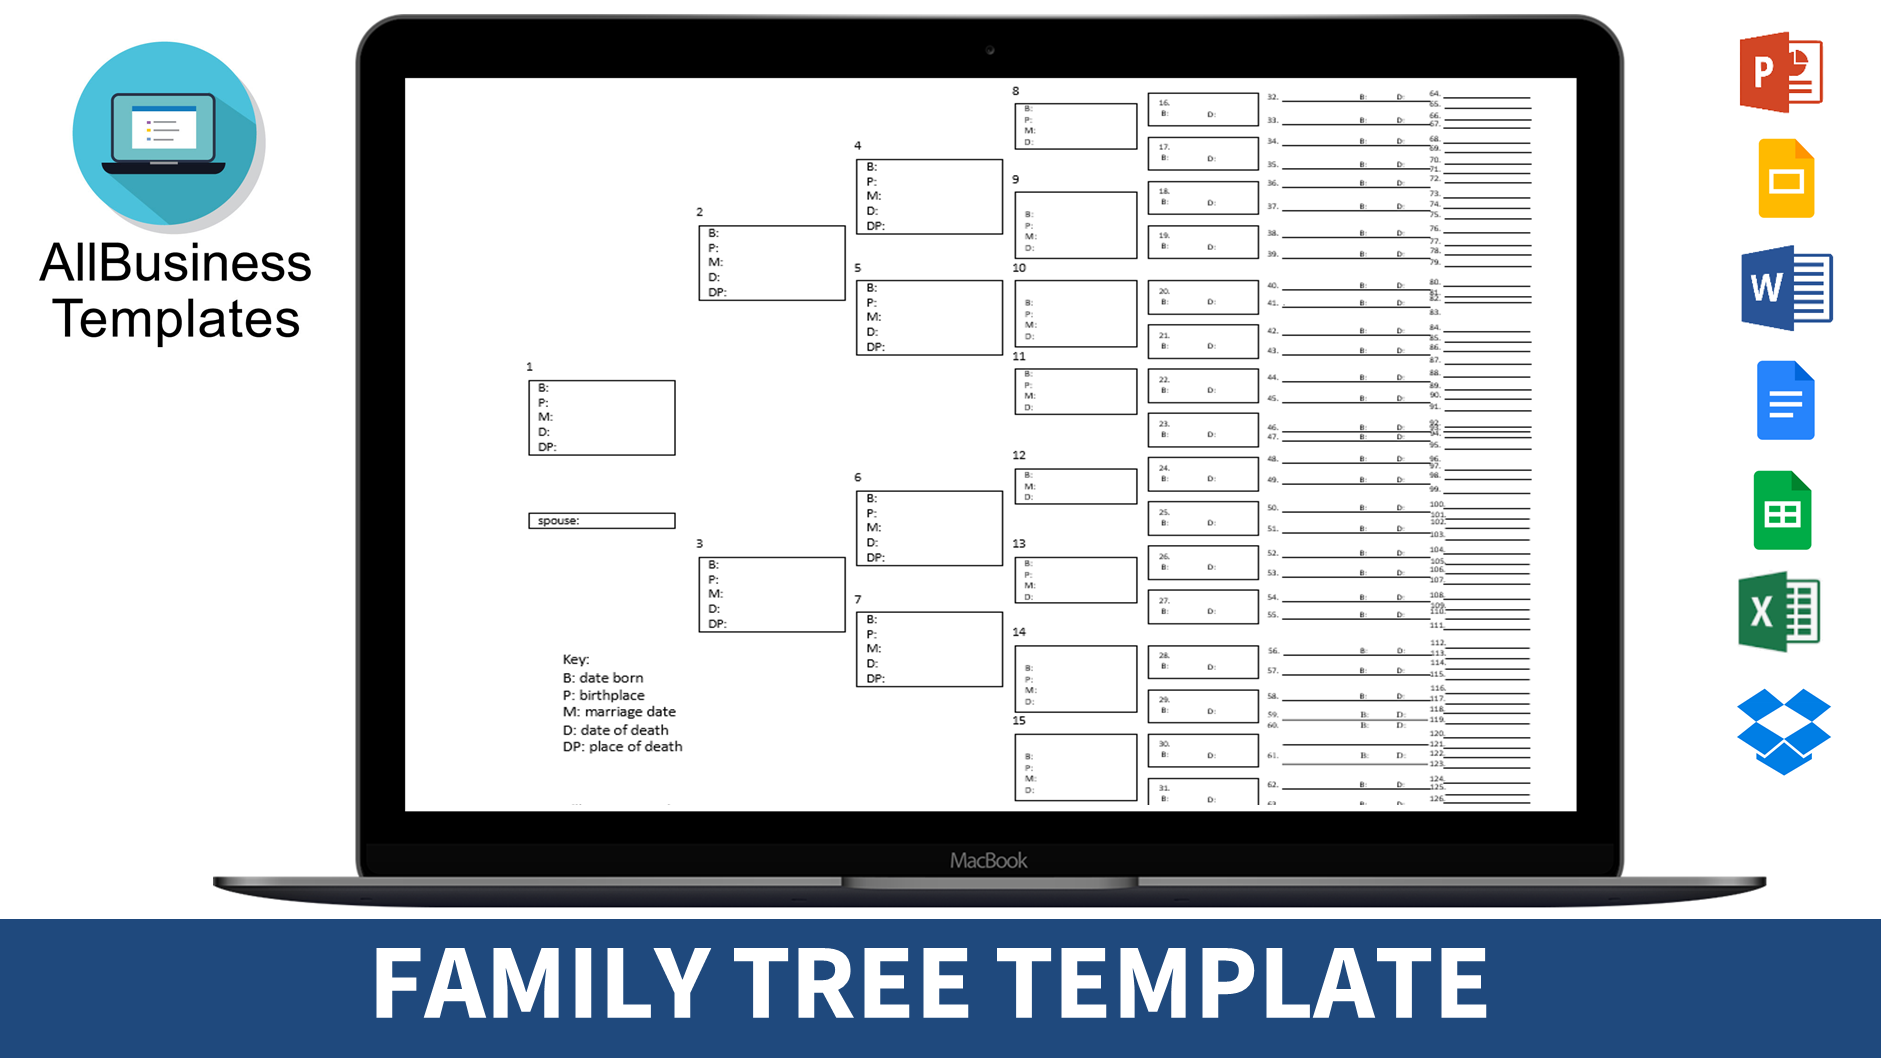 Large Family Tree Template from www.allbusinesstemplates.com